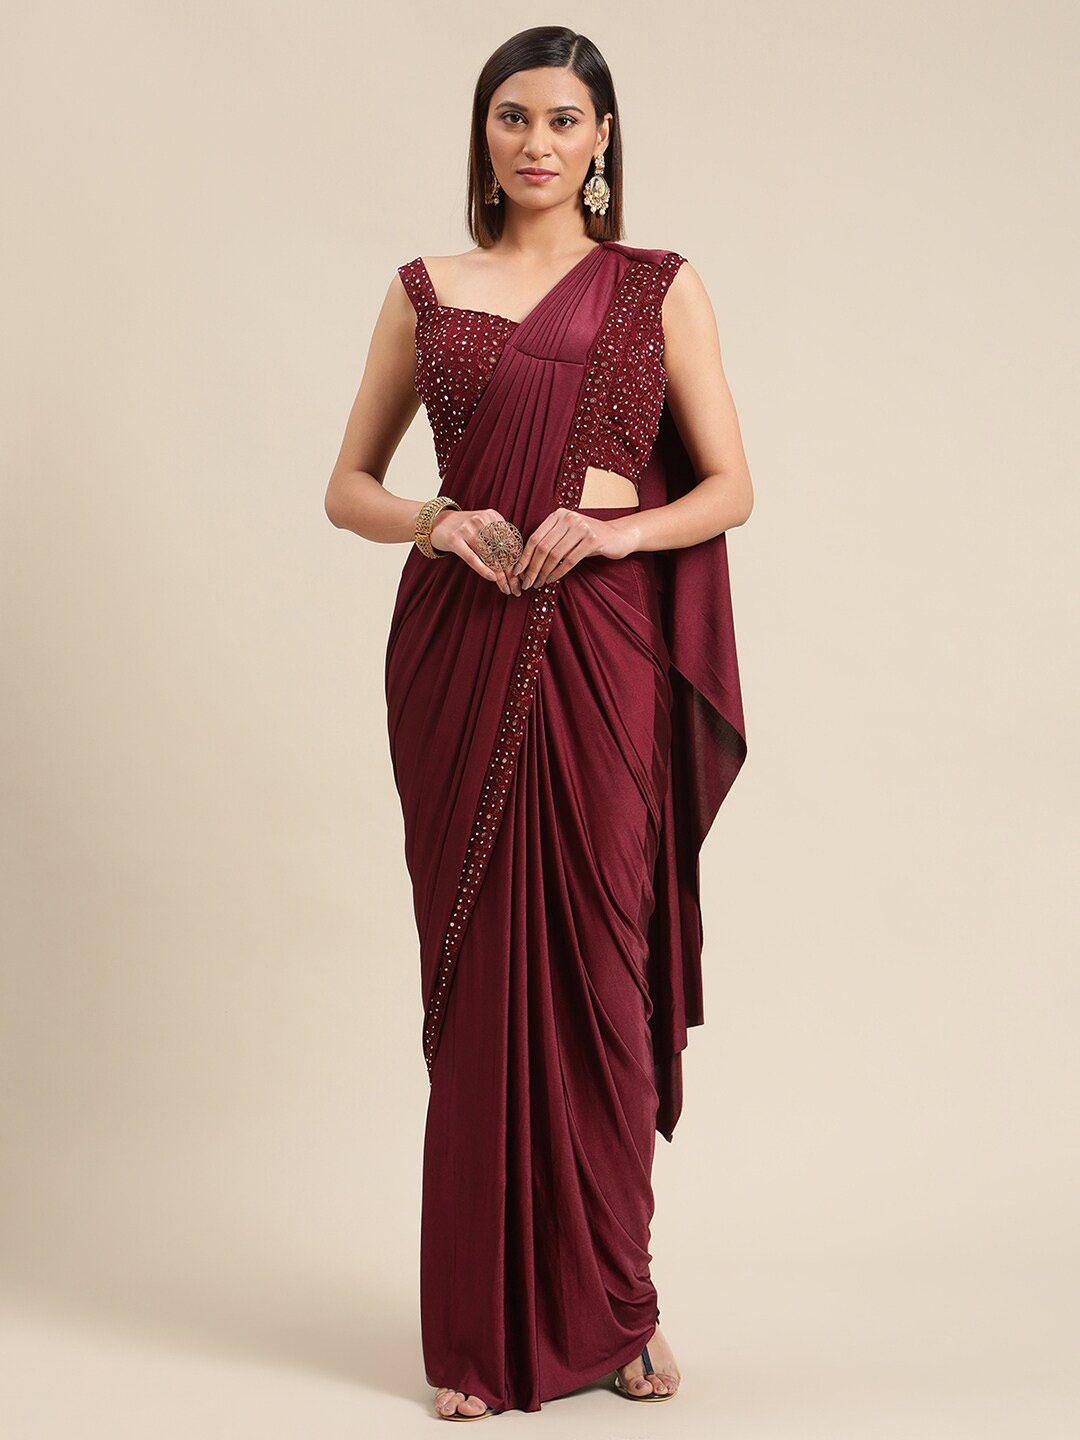 grancy maroon solid embellished blouse ready to wear saree